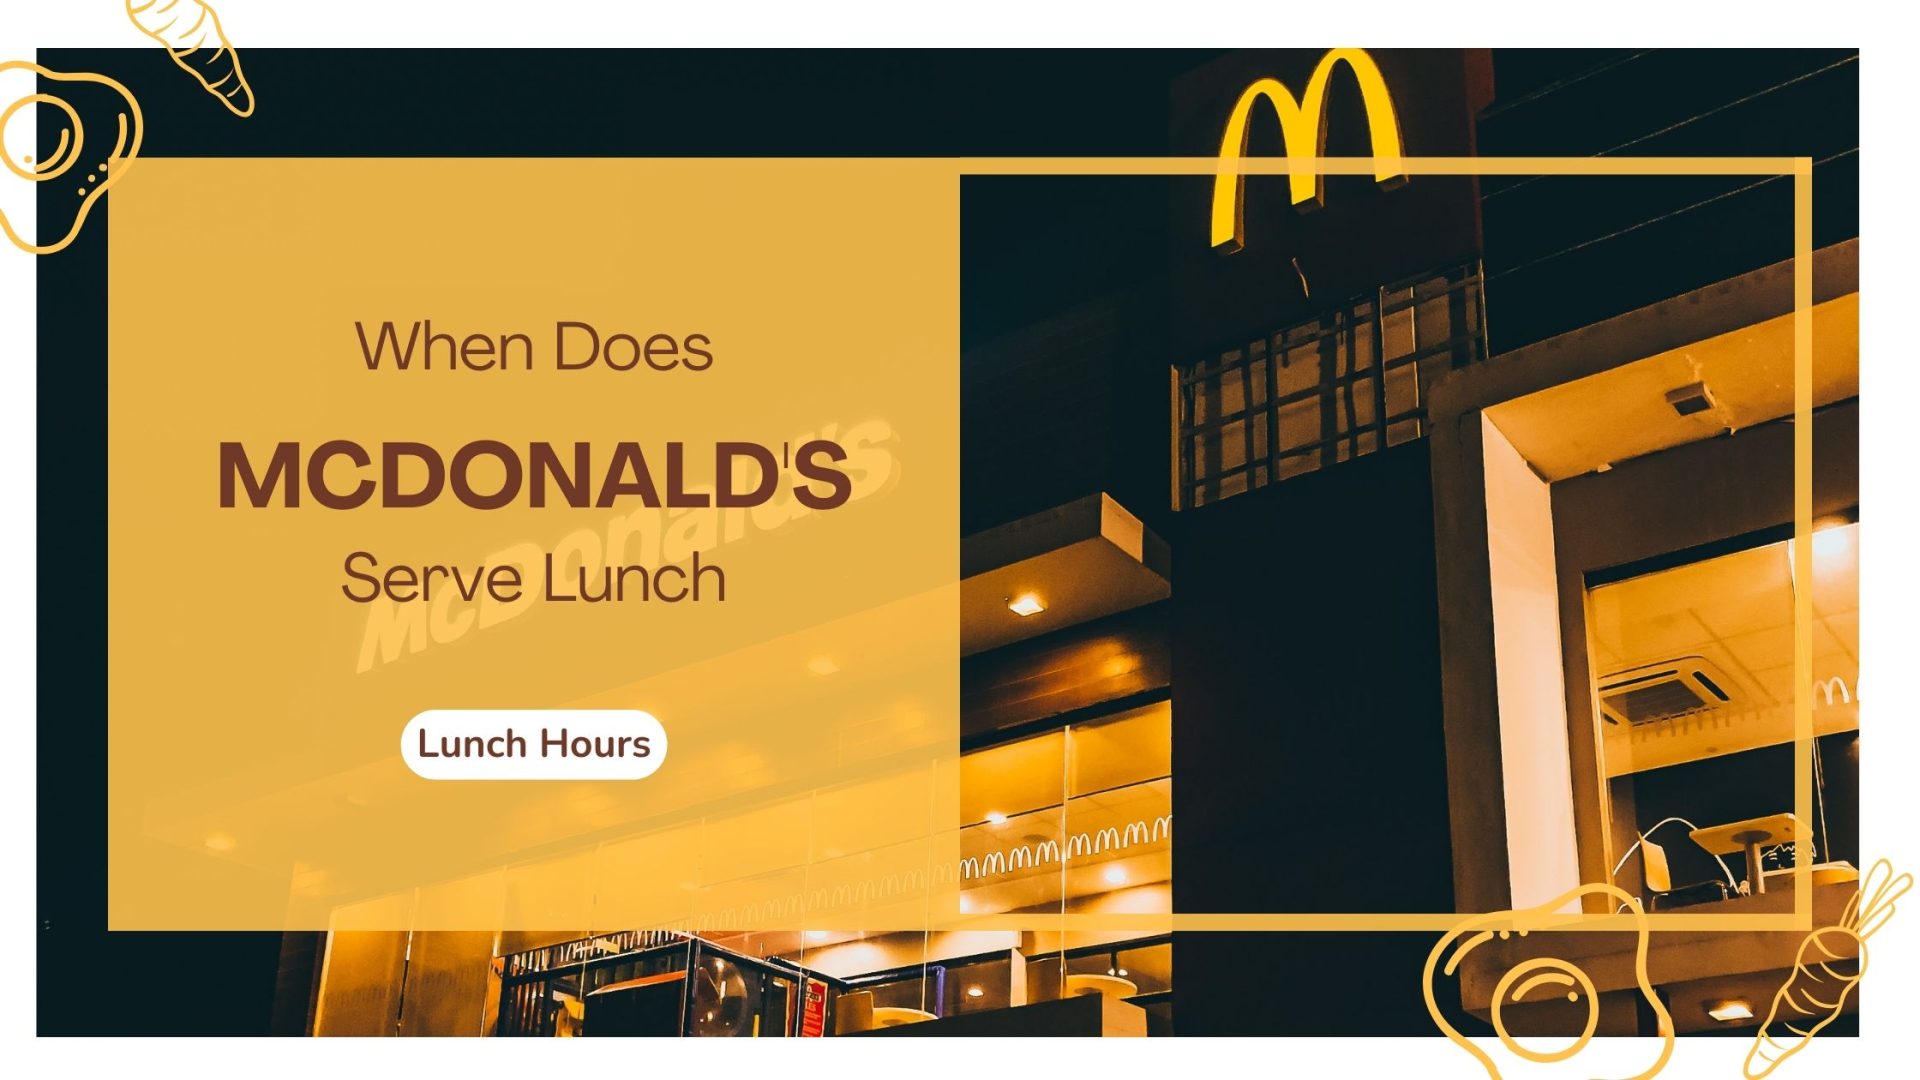 What Time Does McDonald’s Serve Lunch